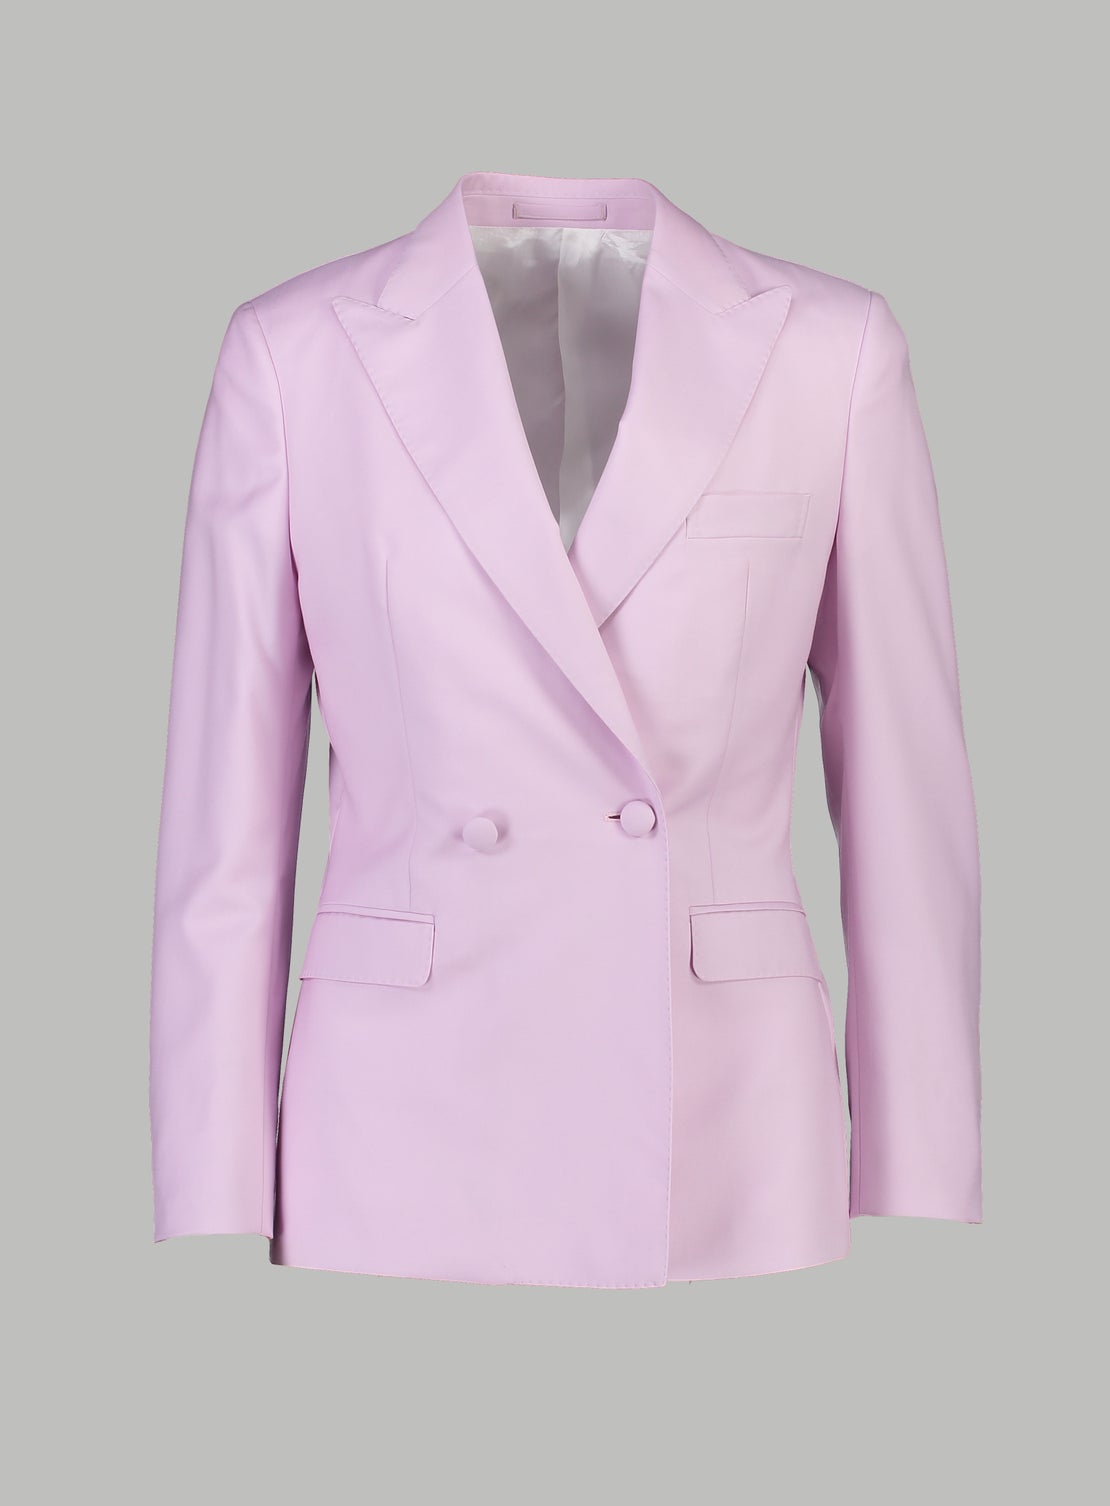 Powder Pink Double Breasted Jacket